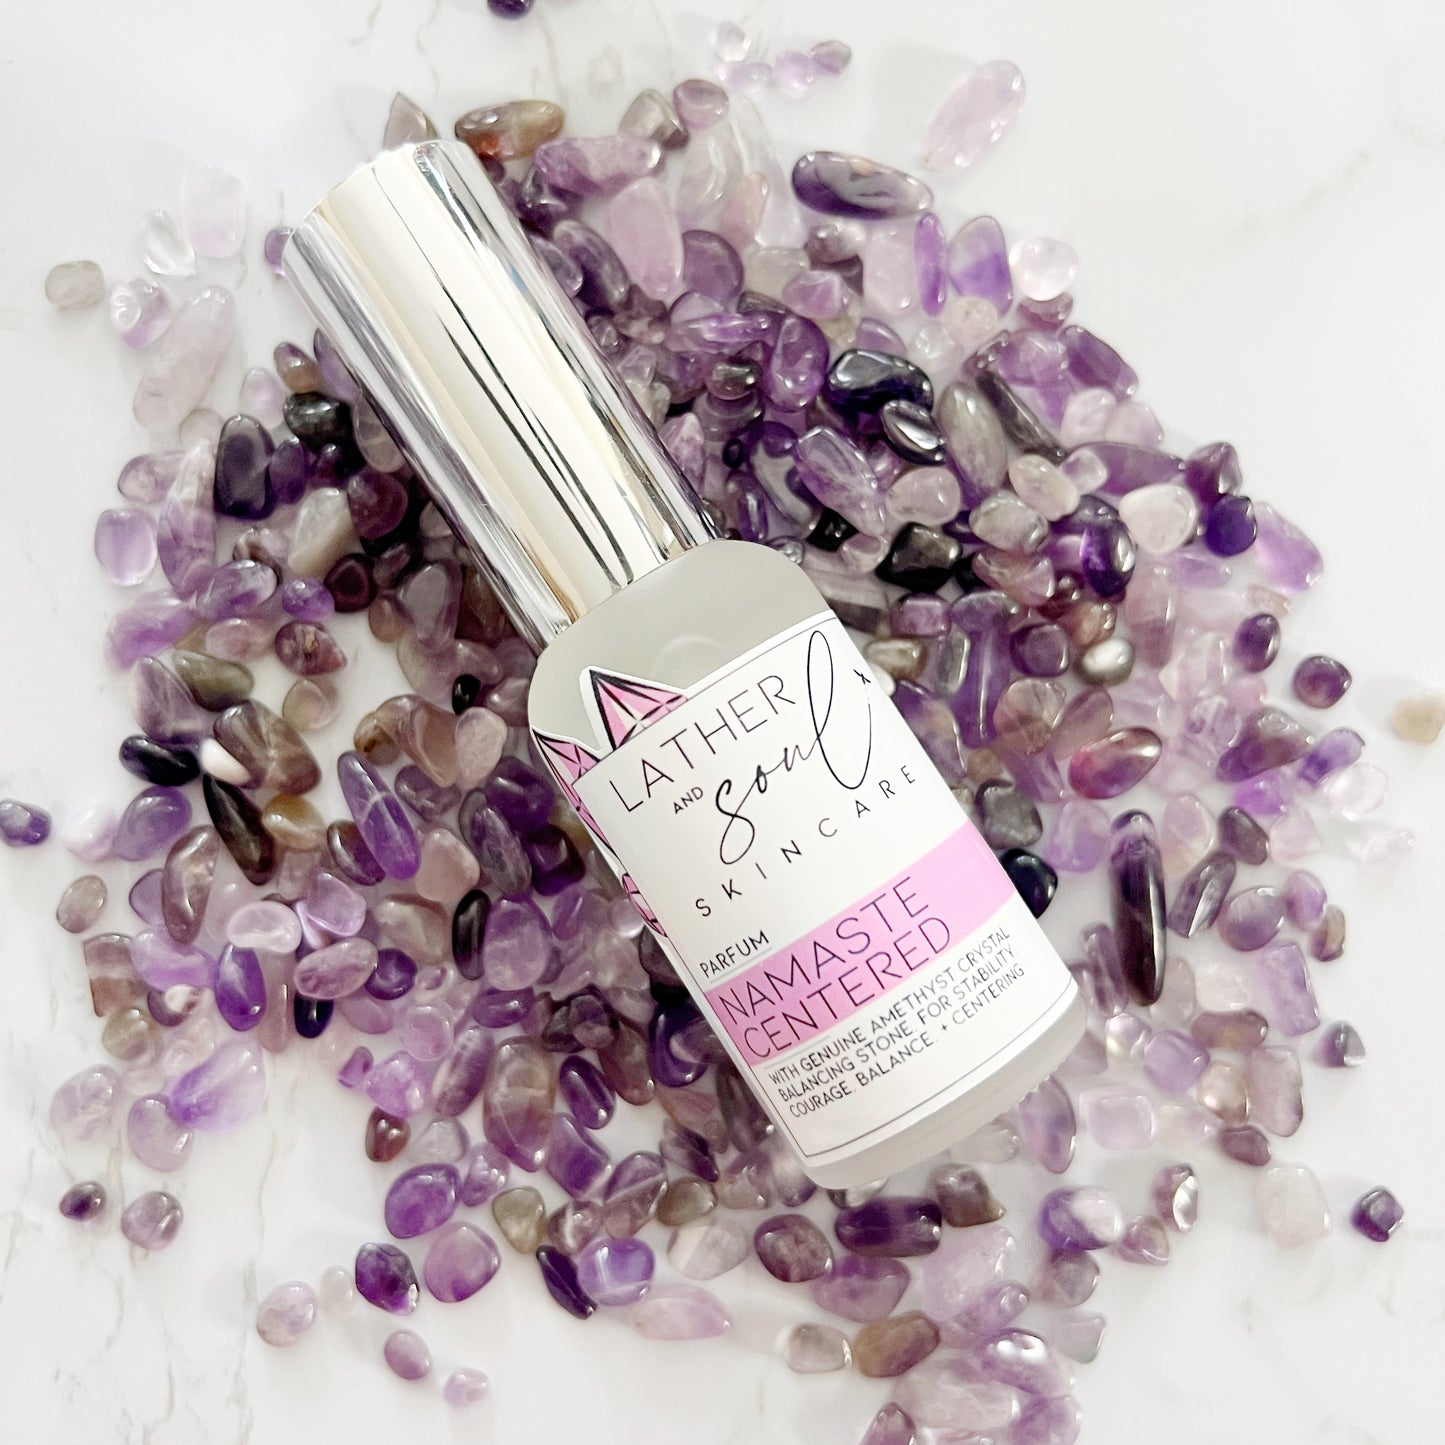 Amethyst infused parfum from Lather and Soul.